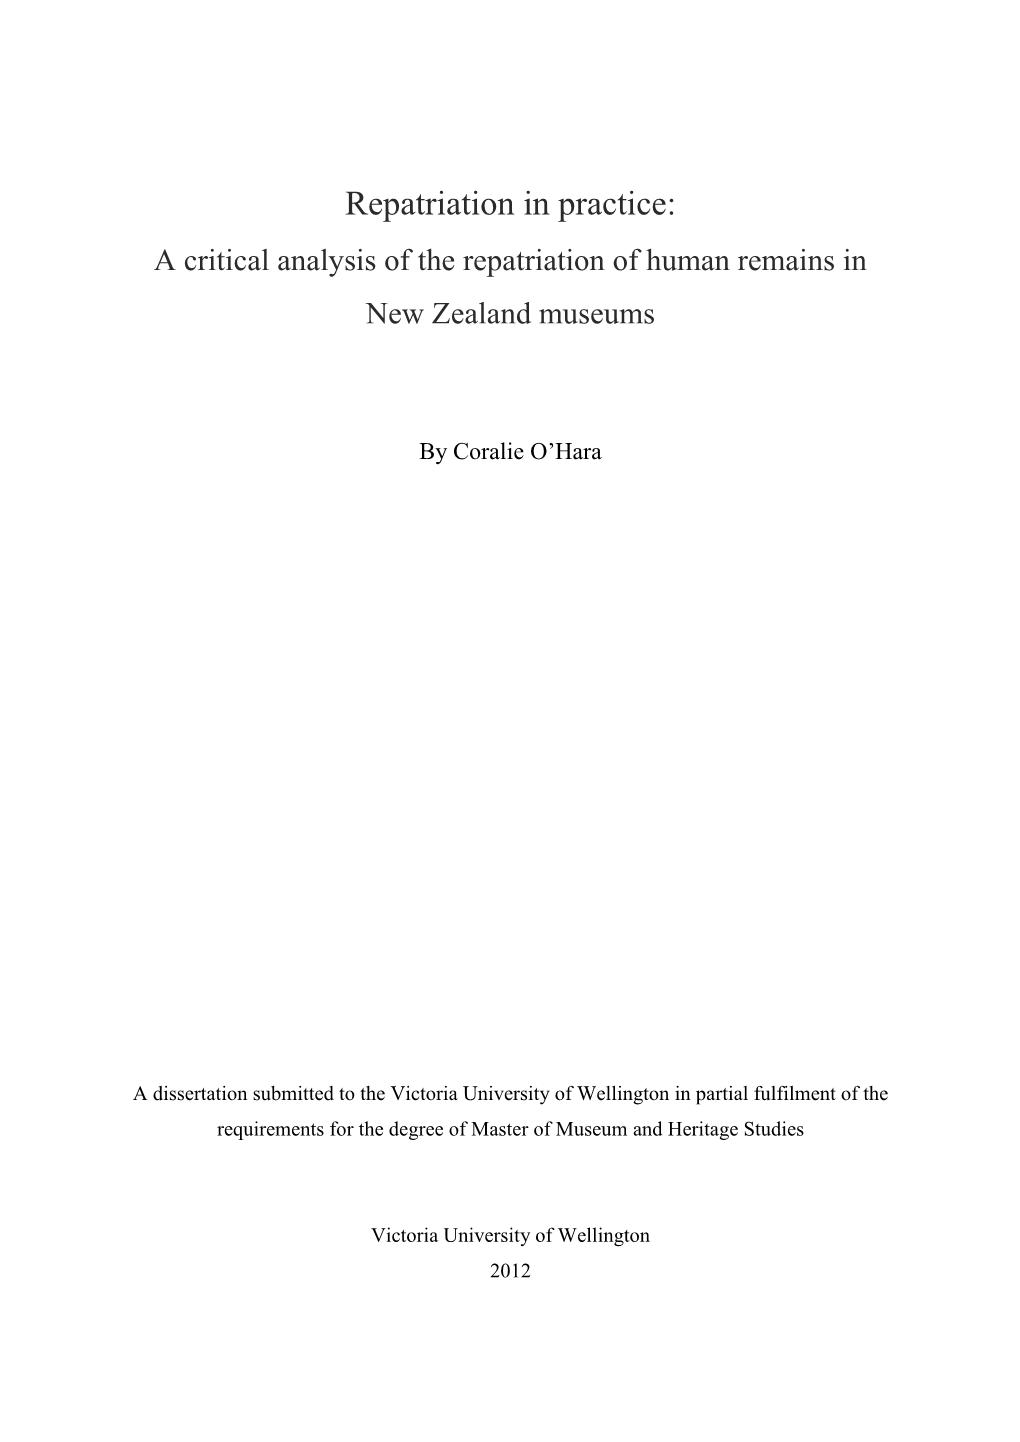 Repatriation in Practice: a Critical Analysis of the Repatriation of Human Remains in New Zealand Museums